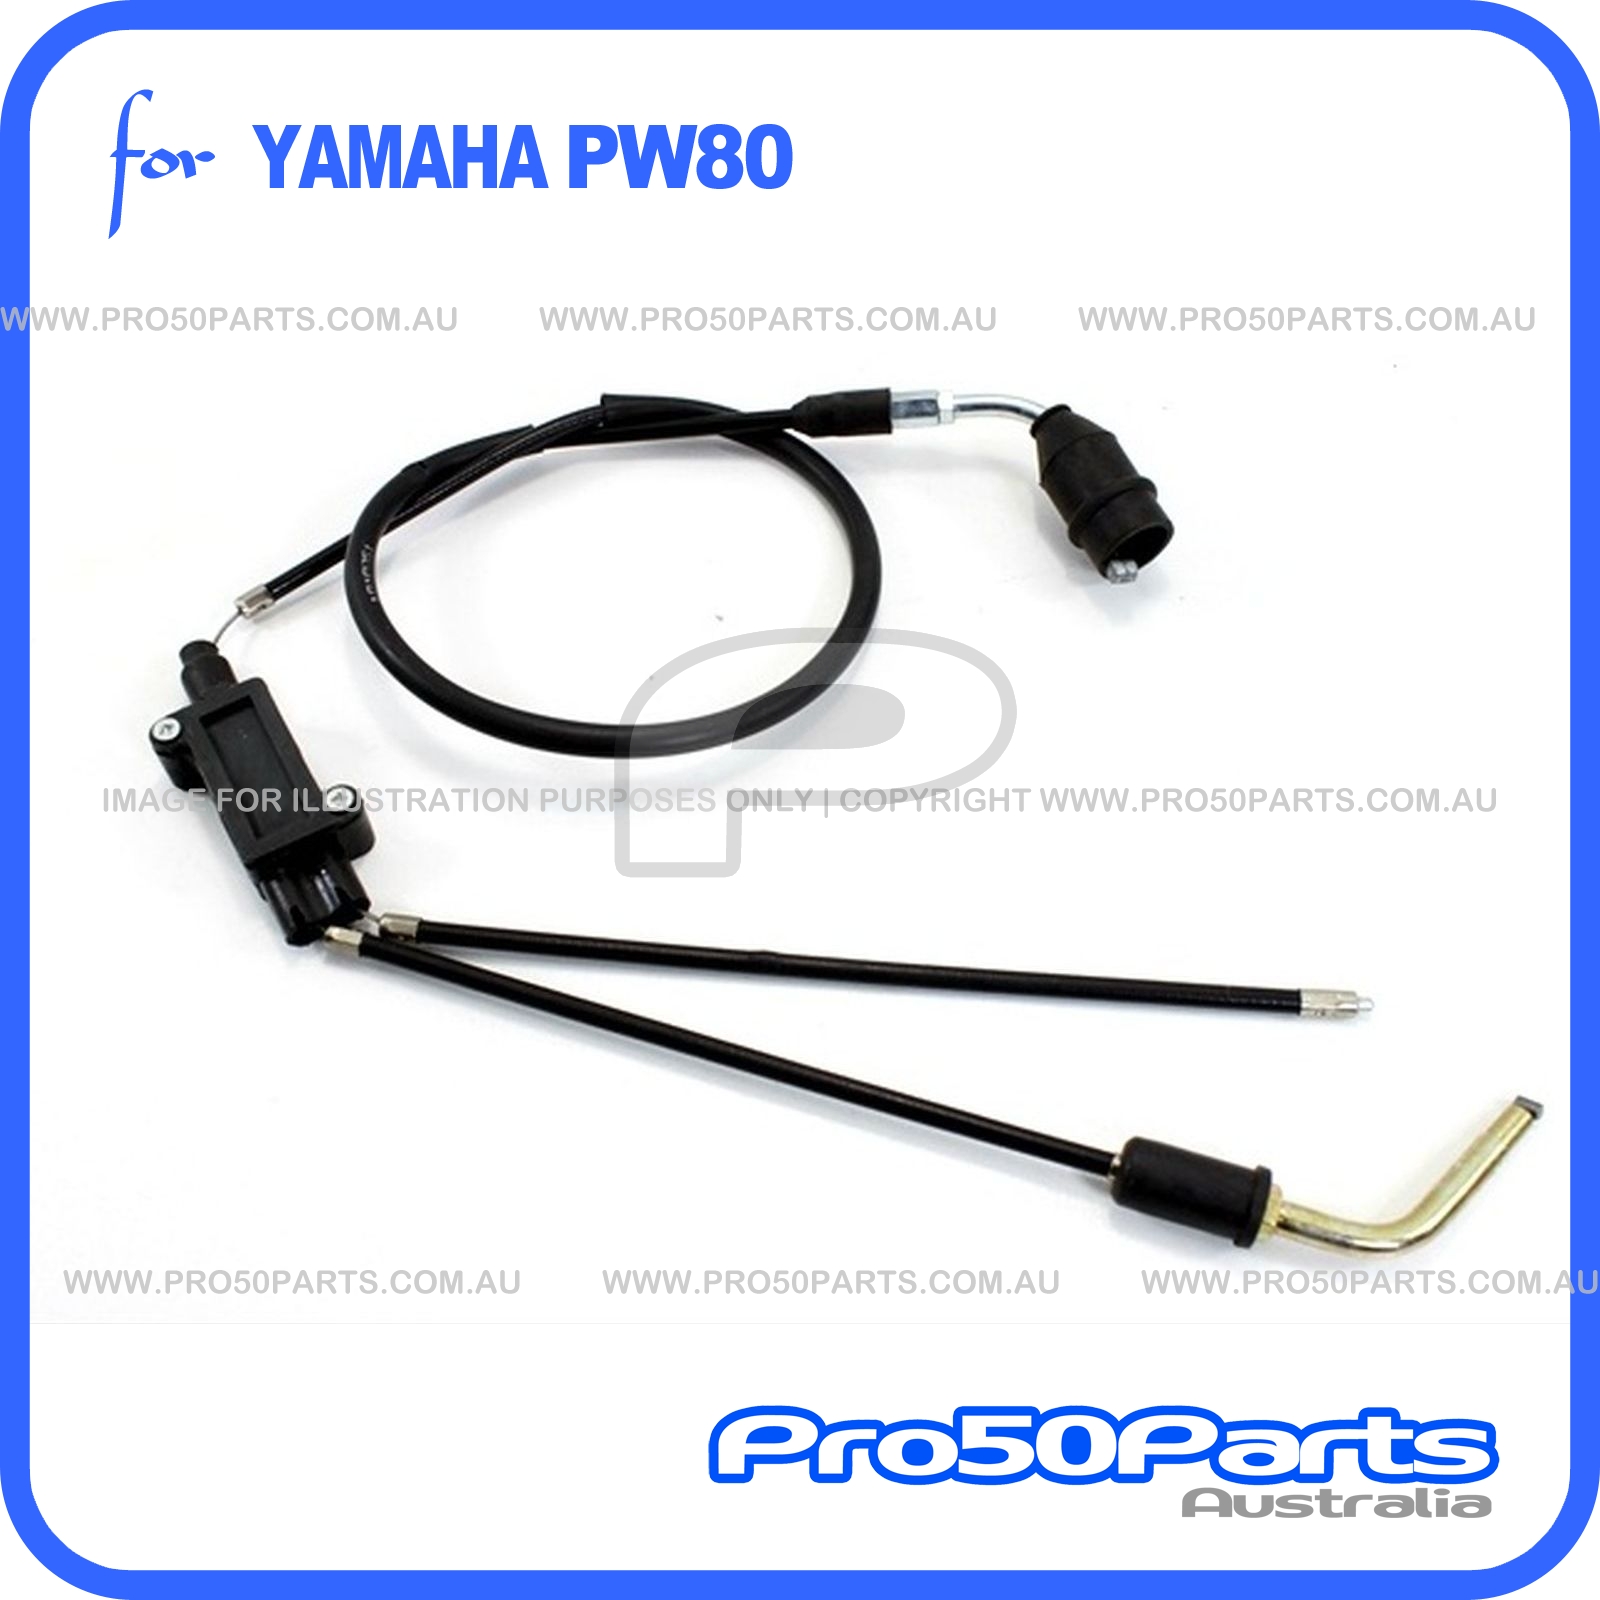 QAZAKY Throttle Cable Pull Choke Cable for Yamaha PW80 BW80 Y-Zinger Dirt Bike Motorcycle PW BW 80 